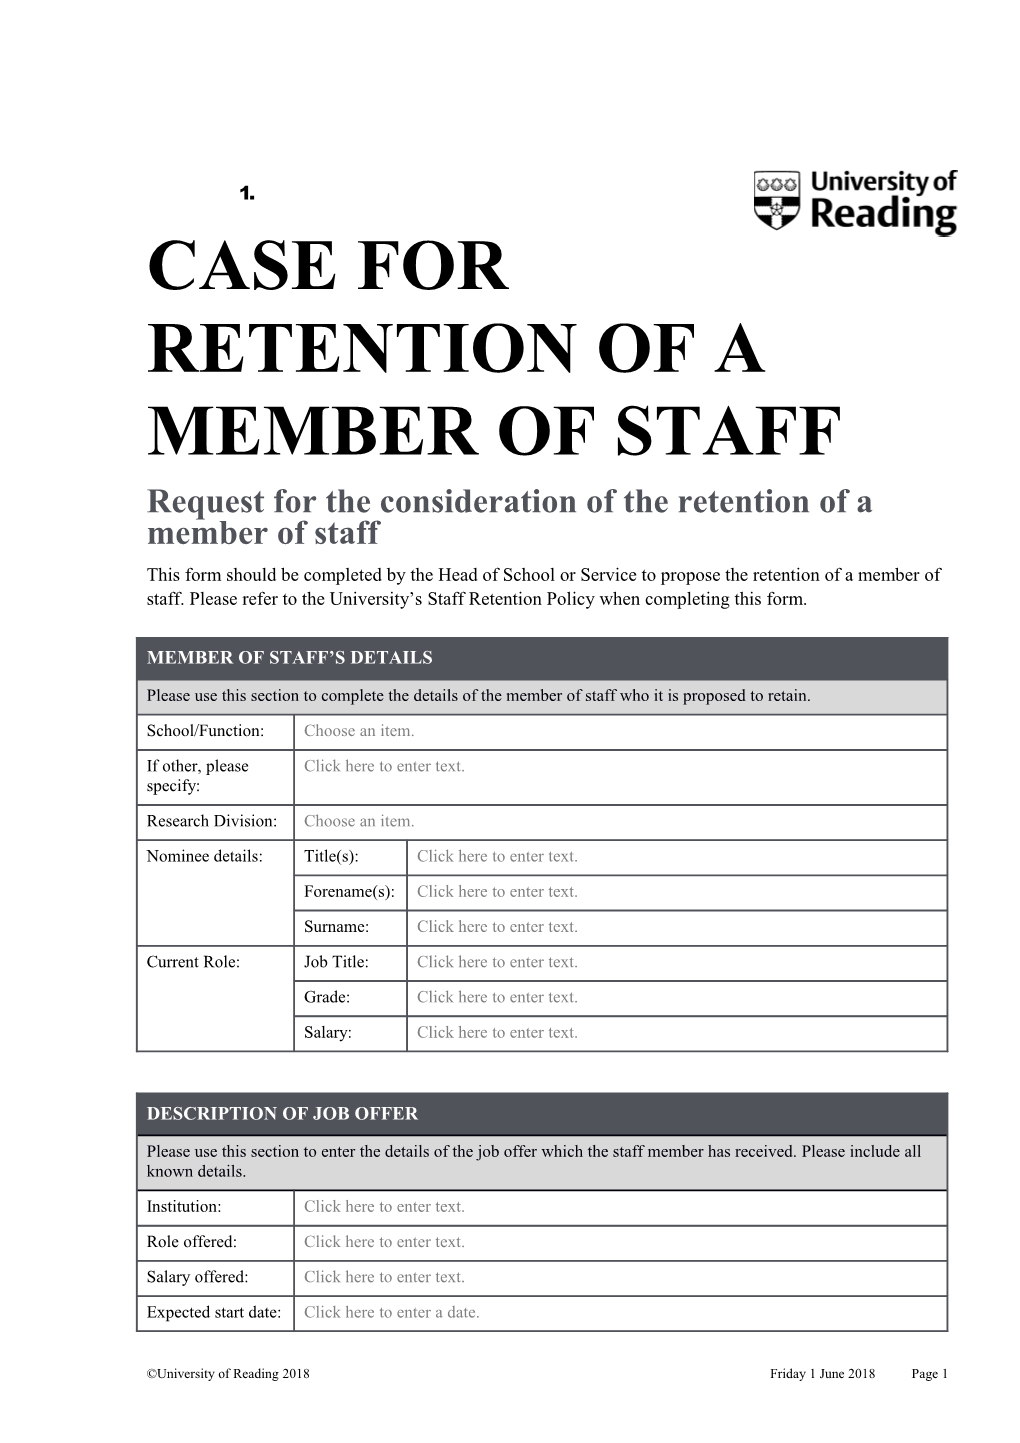 Case for Retention of a Member of Staff